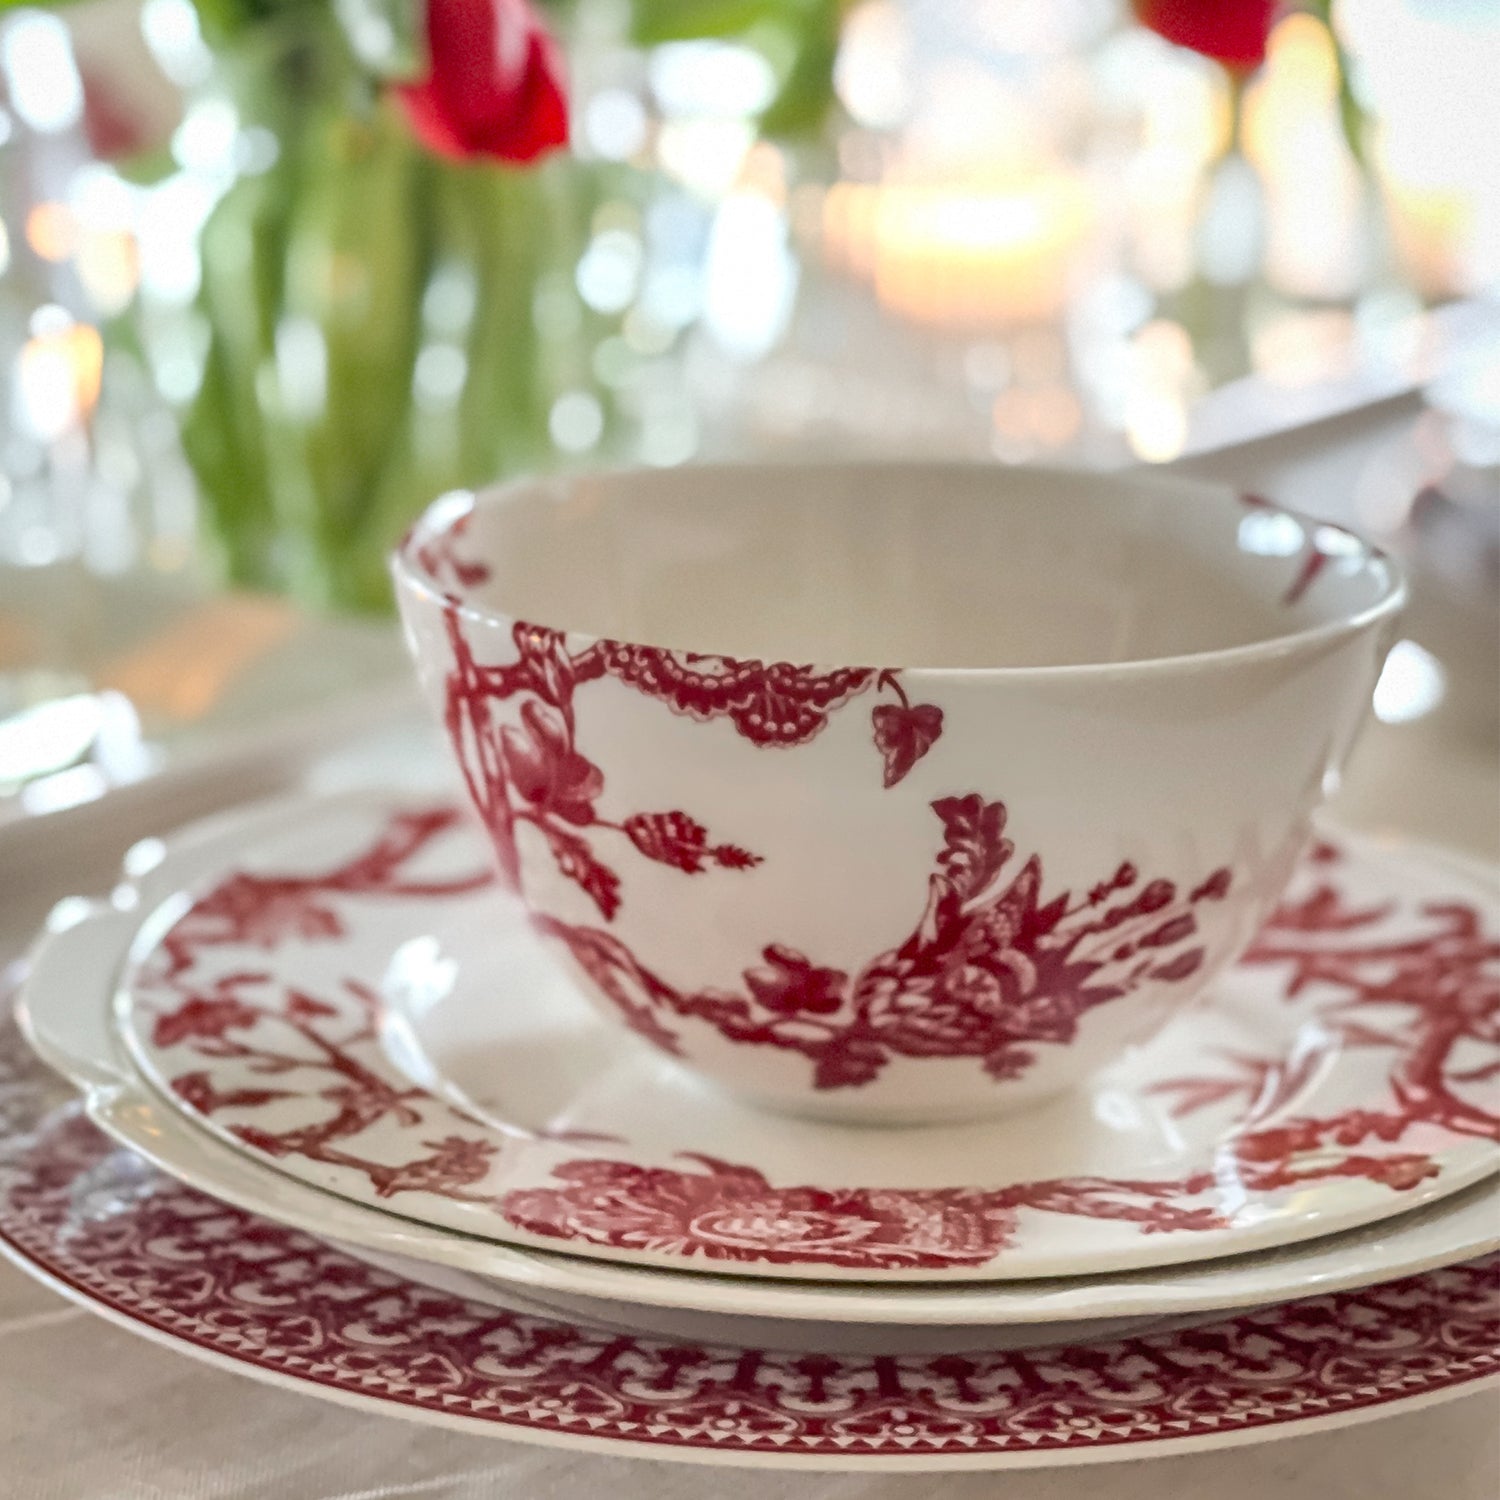 A premium porcelain dinnerware piece, this white cereal bowl features a stunning red floral and bird pattern design, inspired by the Williamsburg Foundation. Introducing the Arcadia Crimson Cereal Bowl by Caskata.